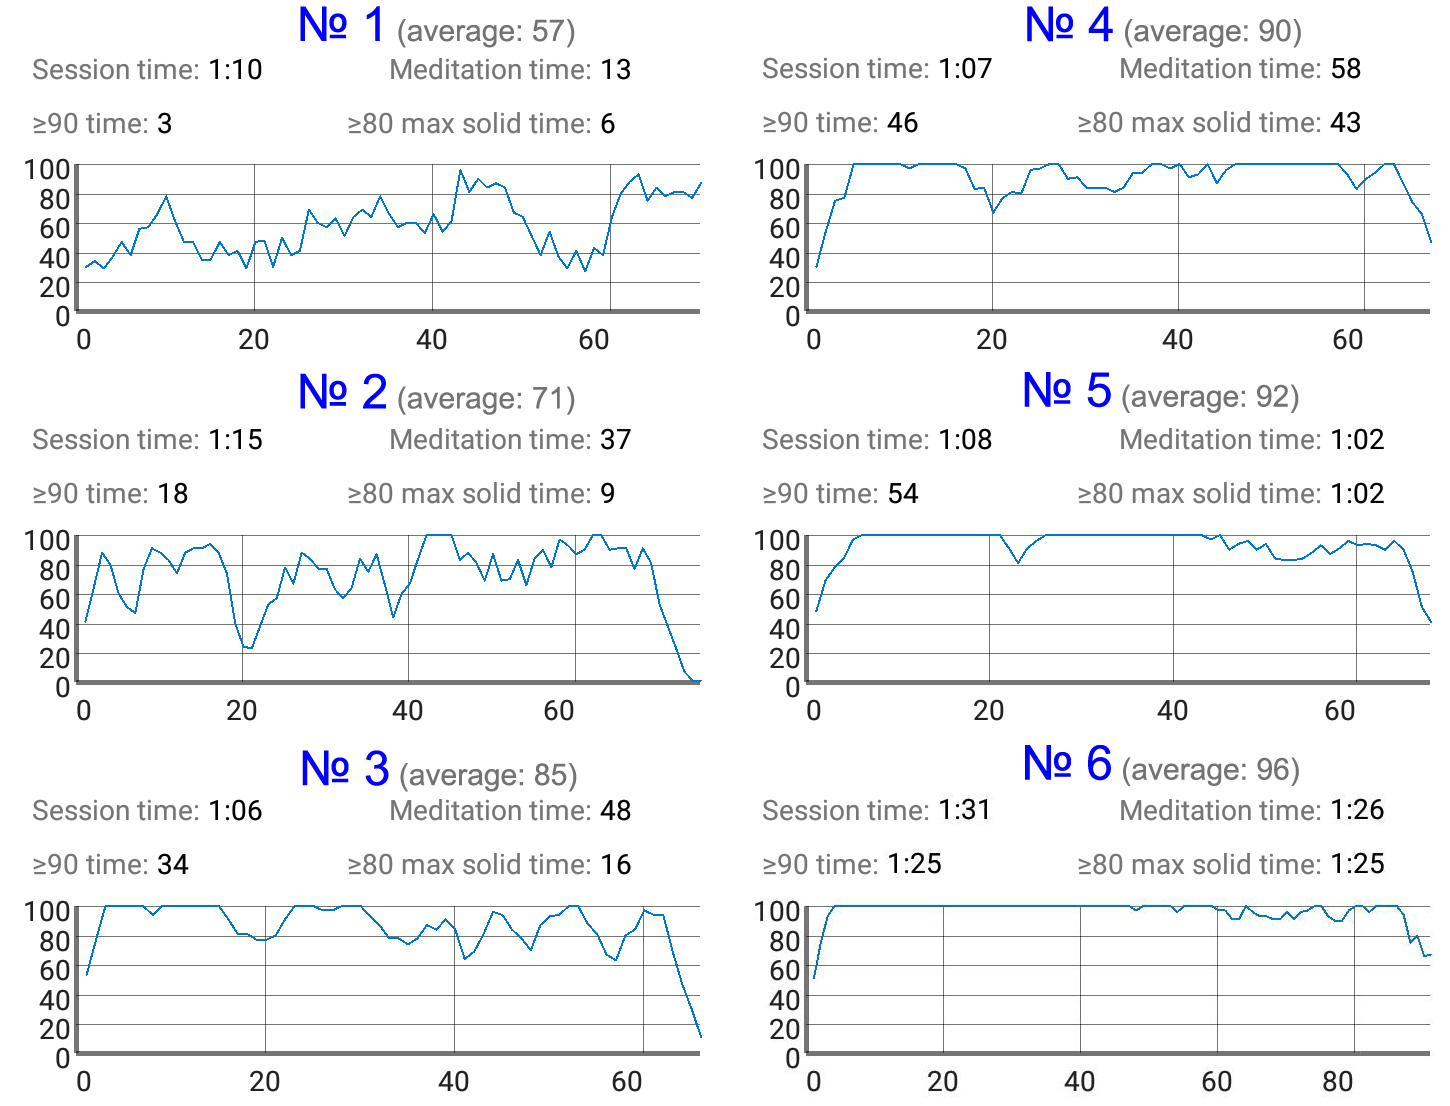 Screenshot fragments of 6 meditation sessions in the “EEG Meditation” application for Android